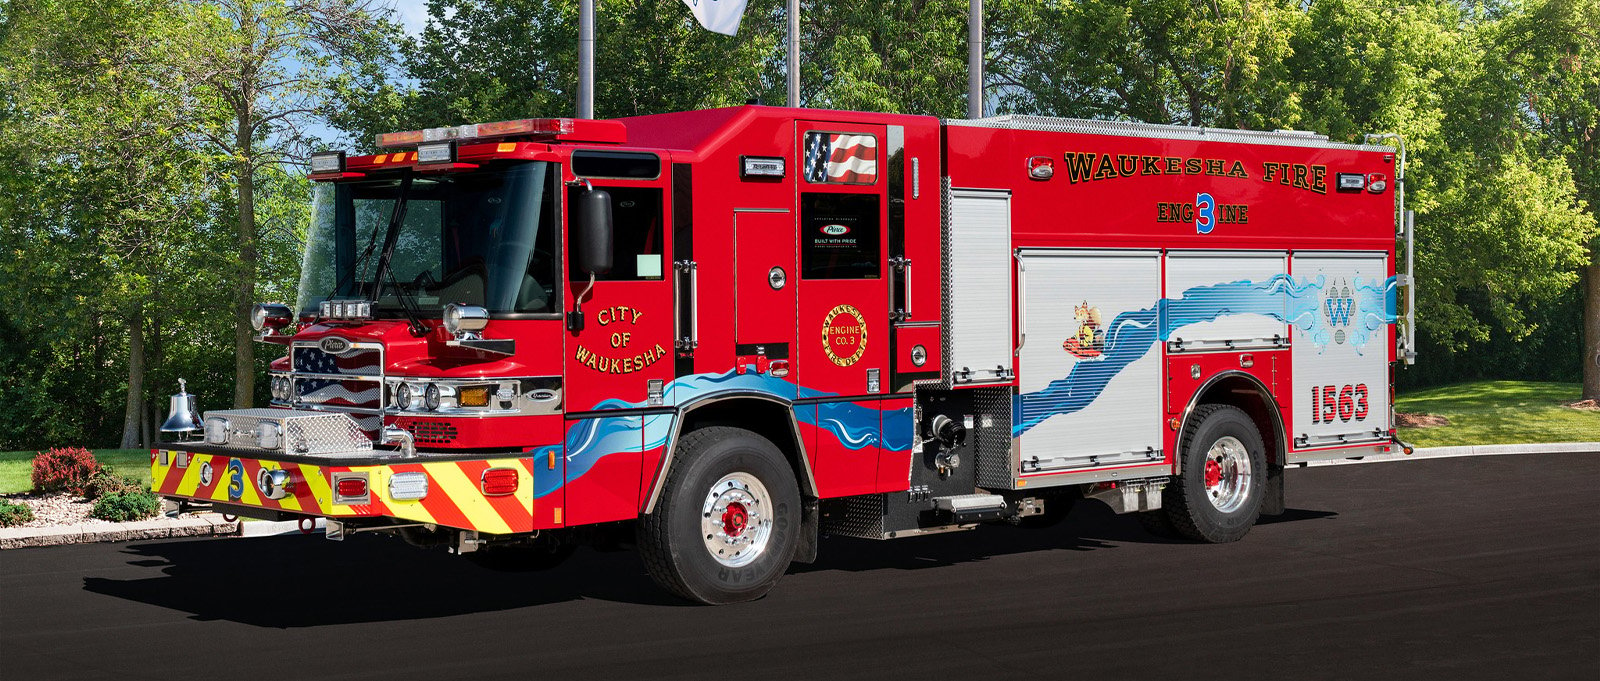 Pierce fire truck, with water graphics inspired by the Fox River from Waukesha, WI, positioned in front of the American, Wisconsin, and Pierce flags.